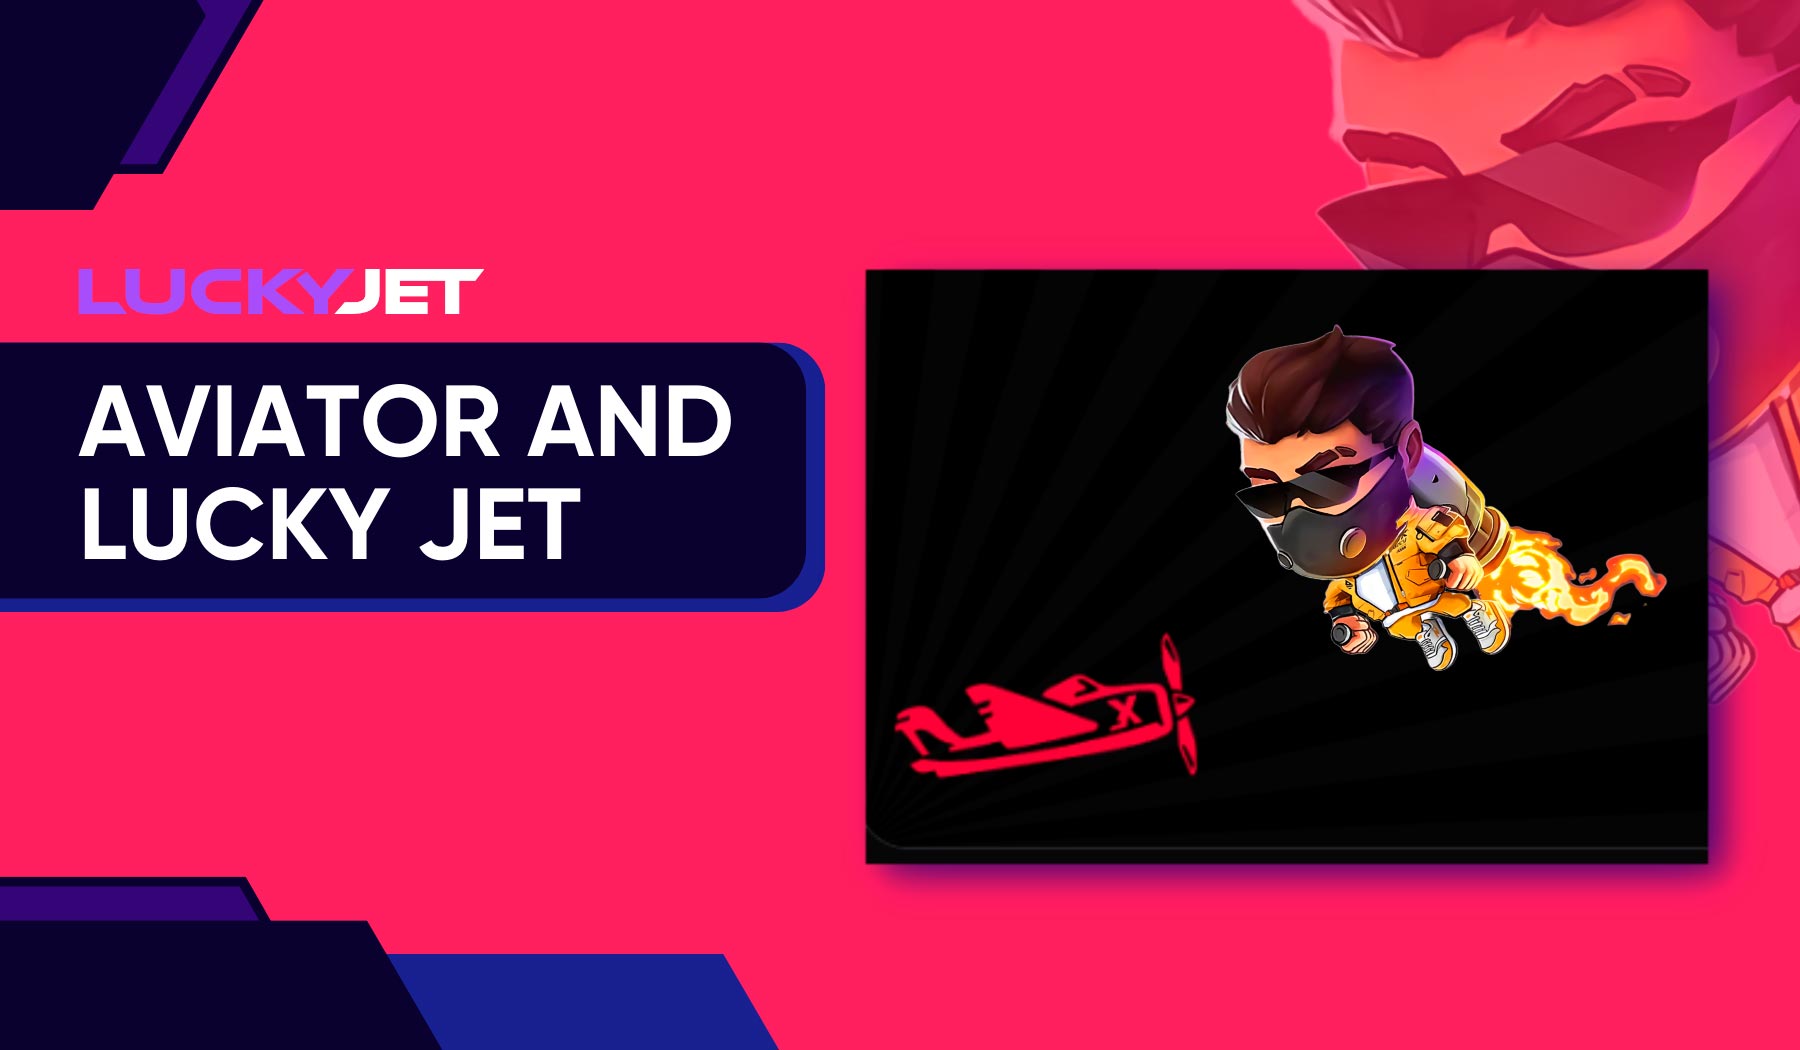 Aviator and Lucky Jet share similarities in basic gameplay